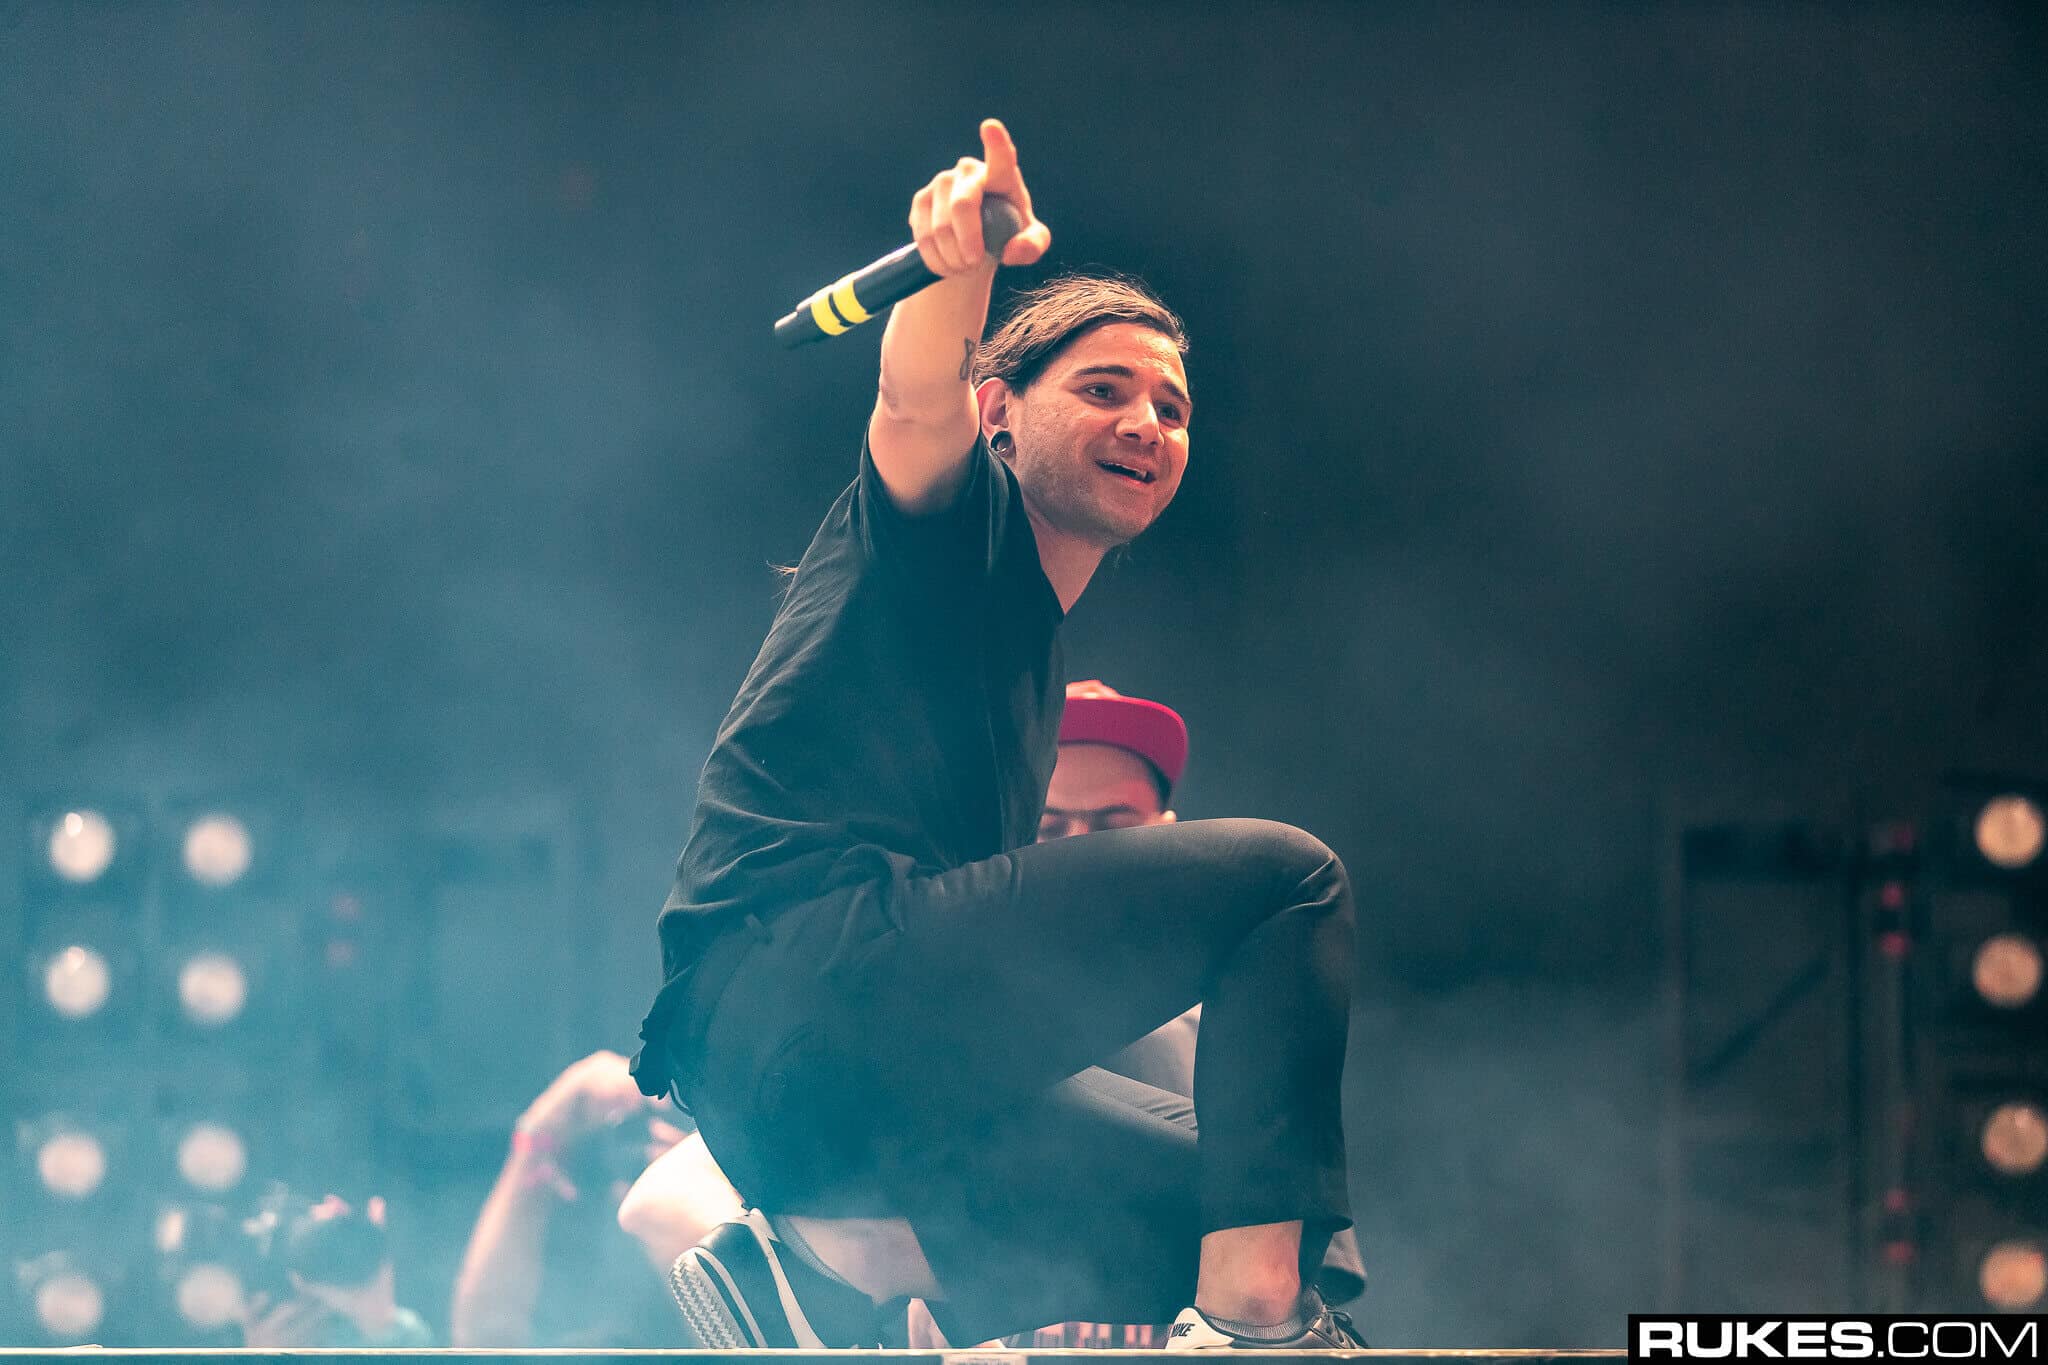 Flava D teases Skrillex collaboration in Q&A session on Instagram